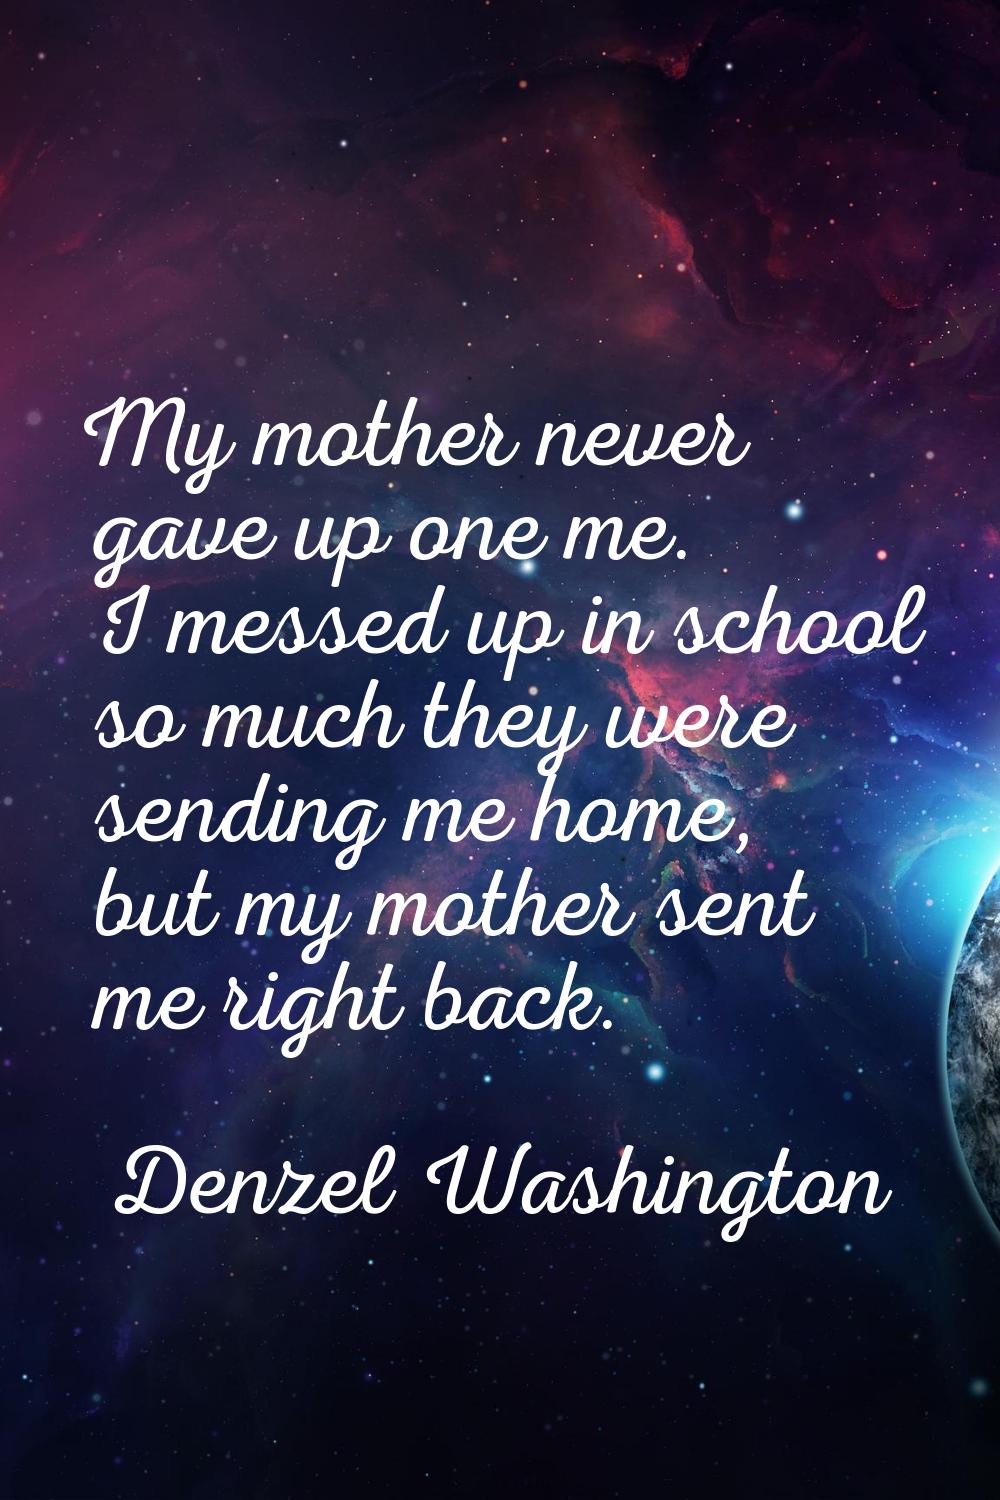 My mother never gave up one me. I messed up in school so much they were sending me home, but my mot